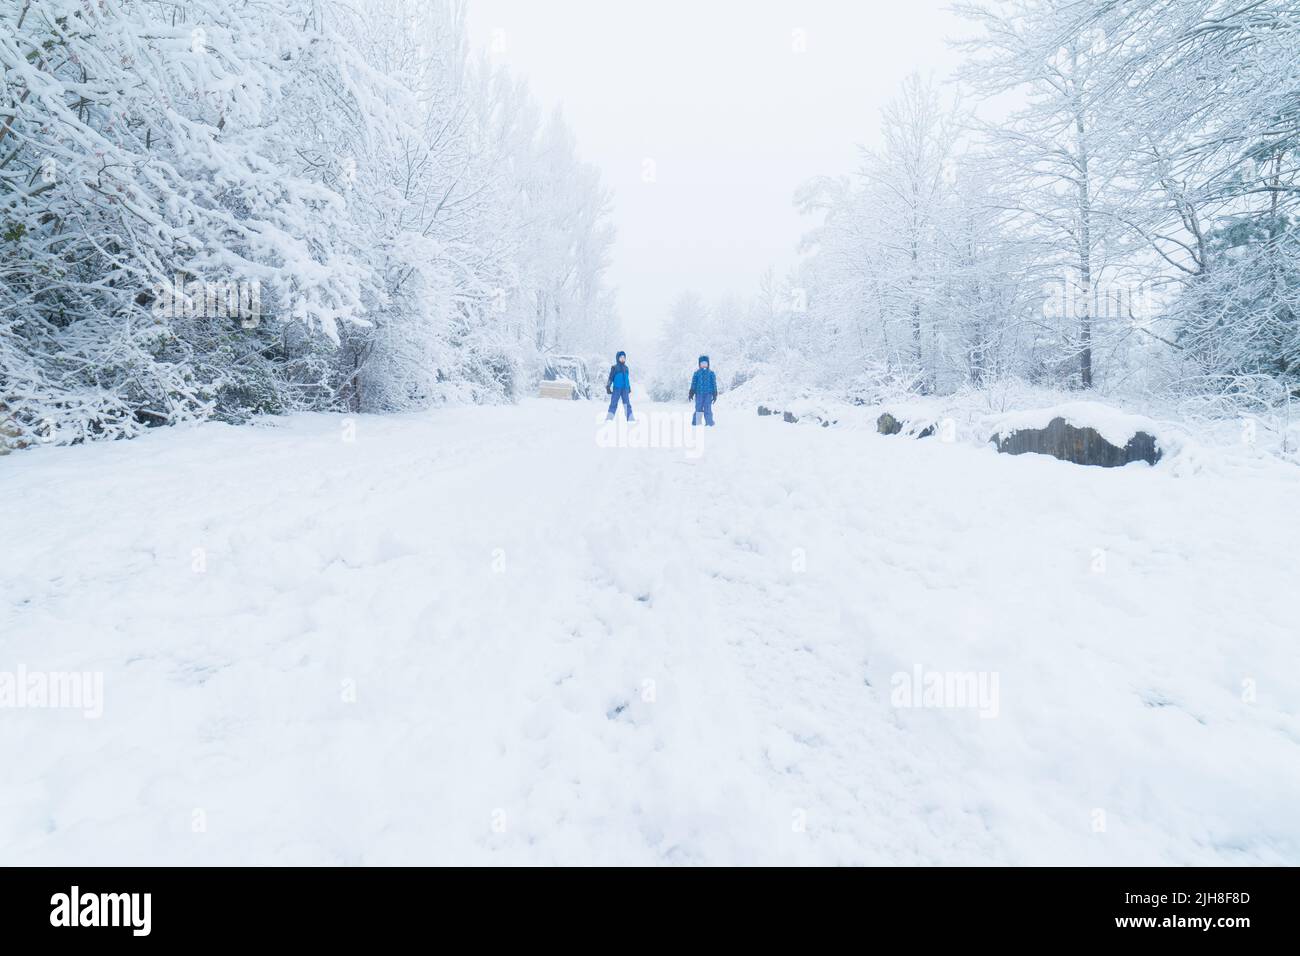 Two kids exploring a snowy track between white pines wearing blue snow suits. The image has big copy space. Stock Photo